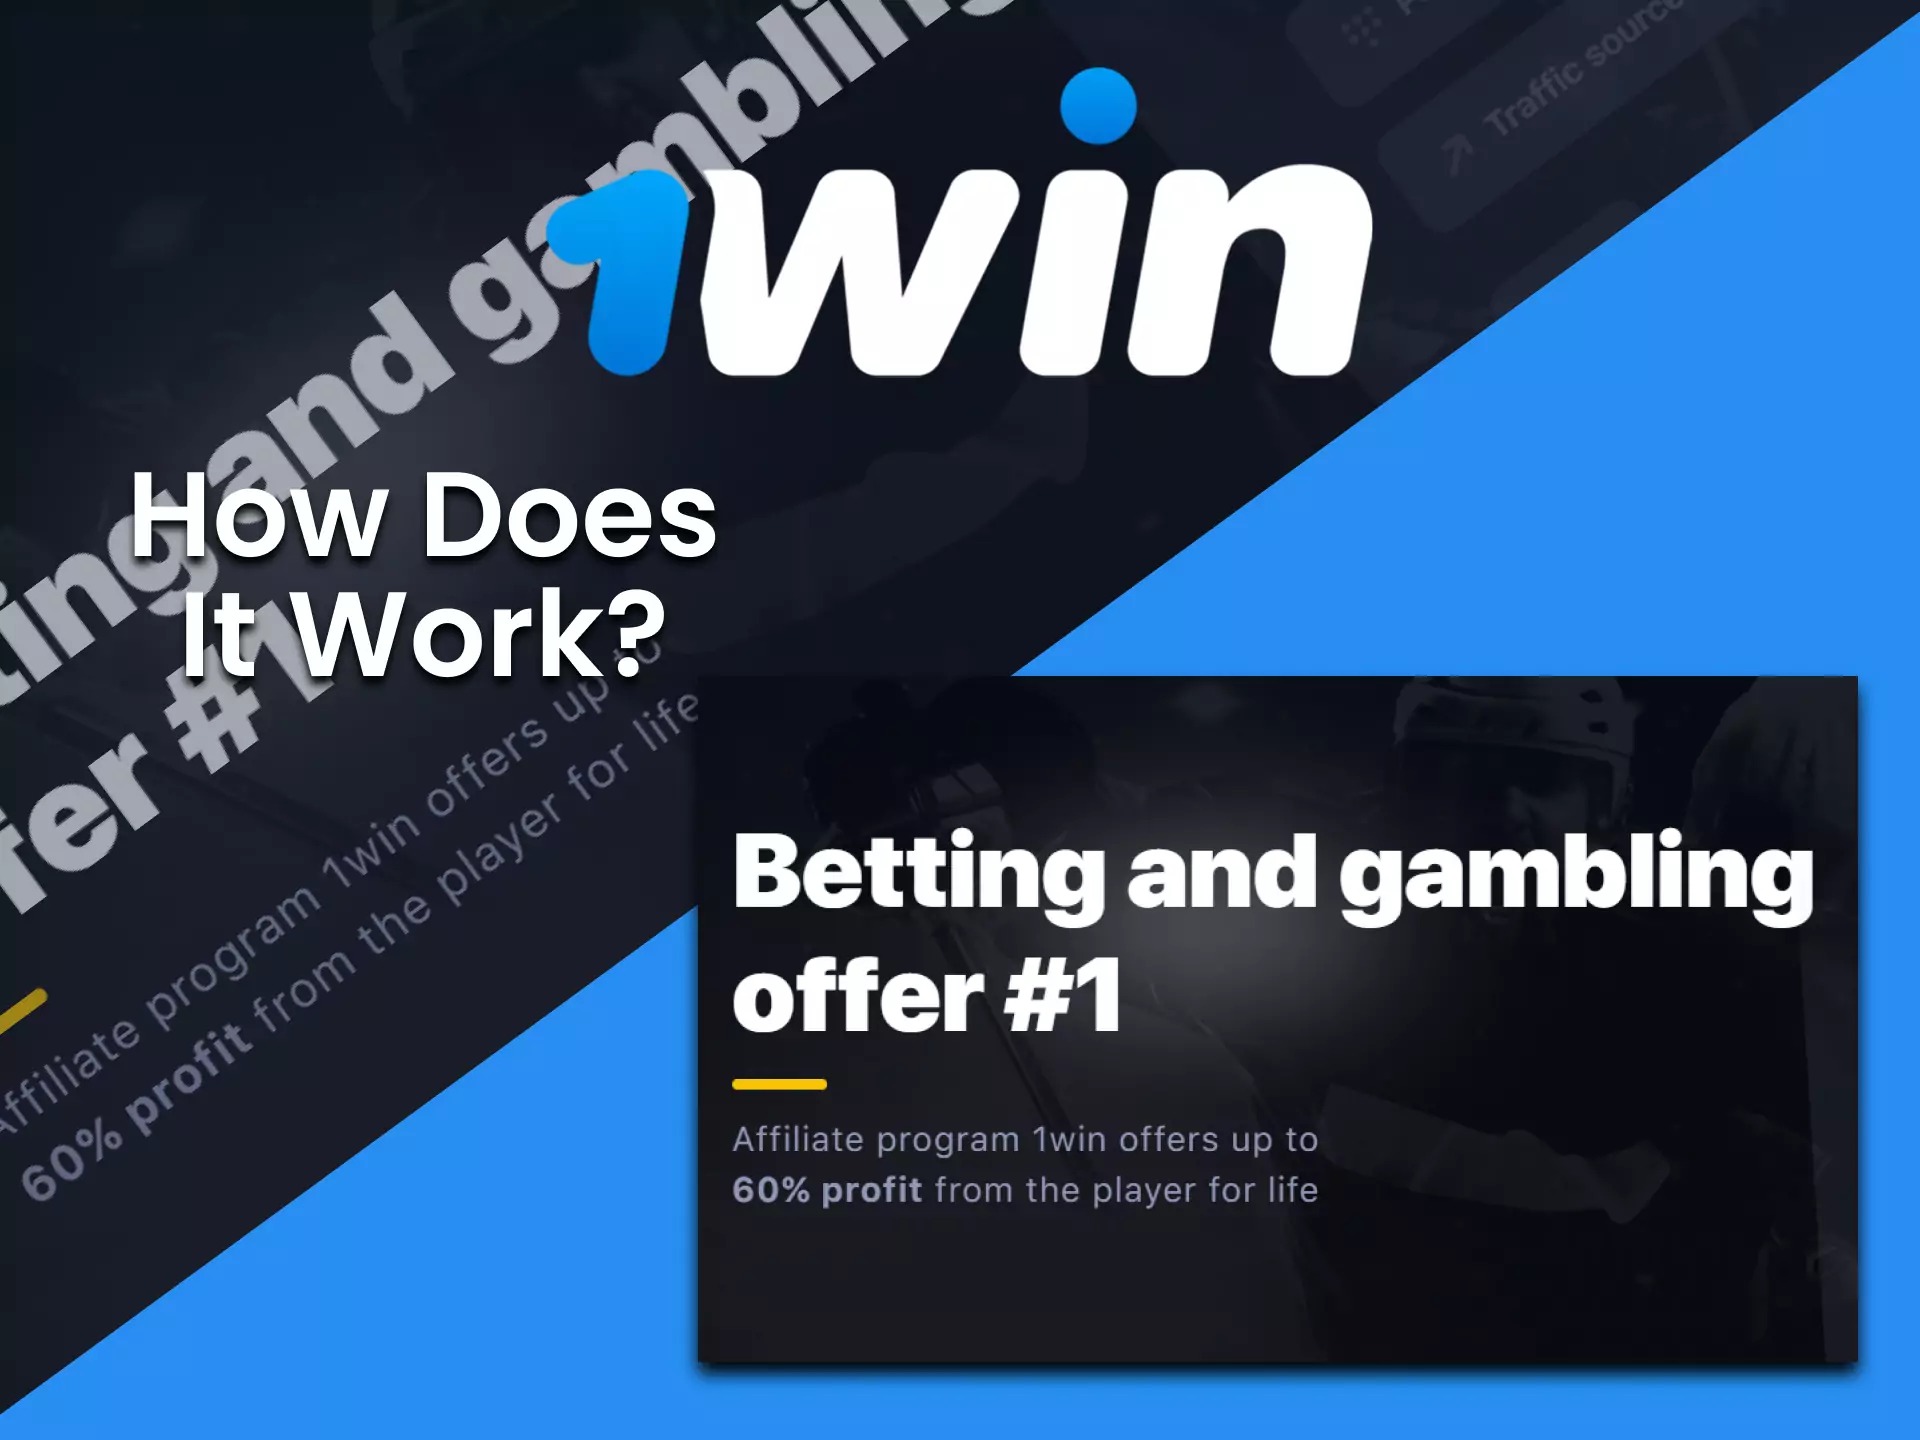 You can invite newcomers to the betting platform and get profit from the 1win affiliate program.